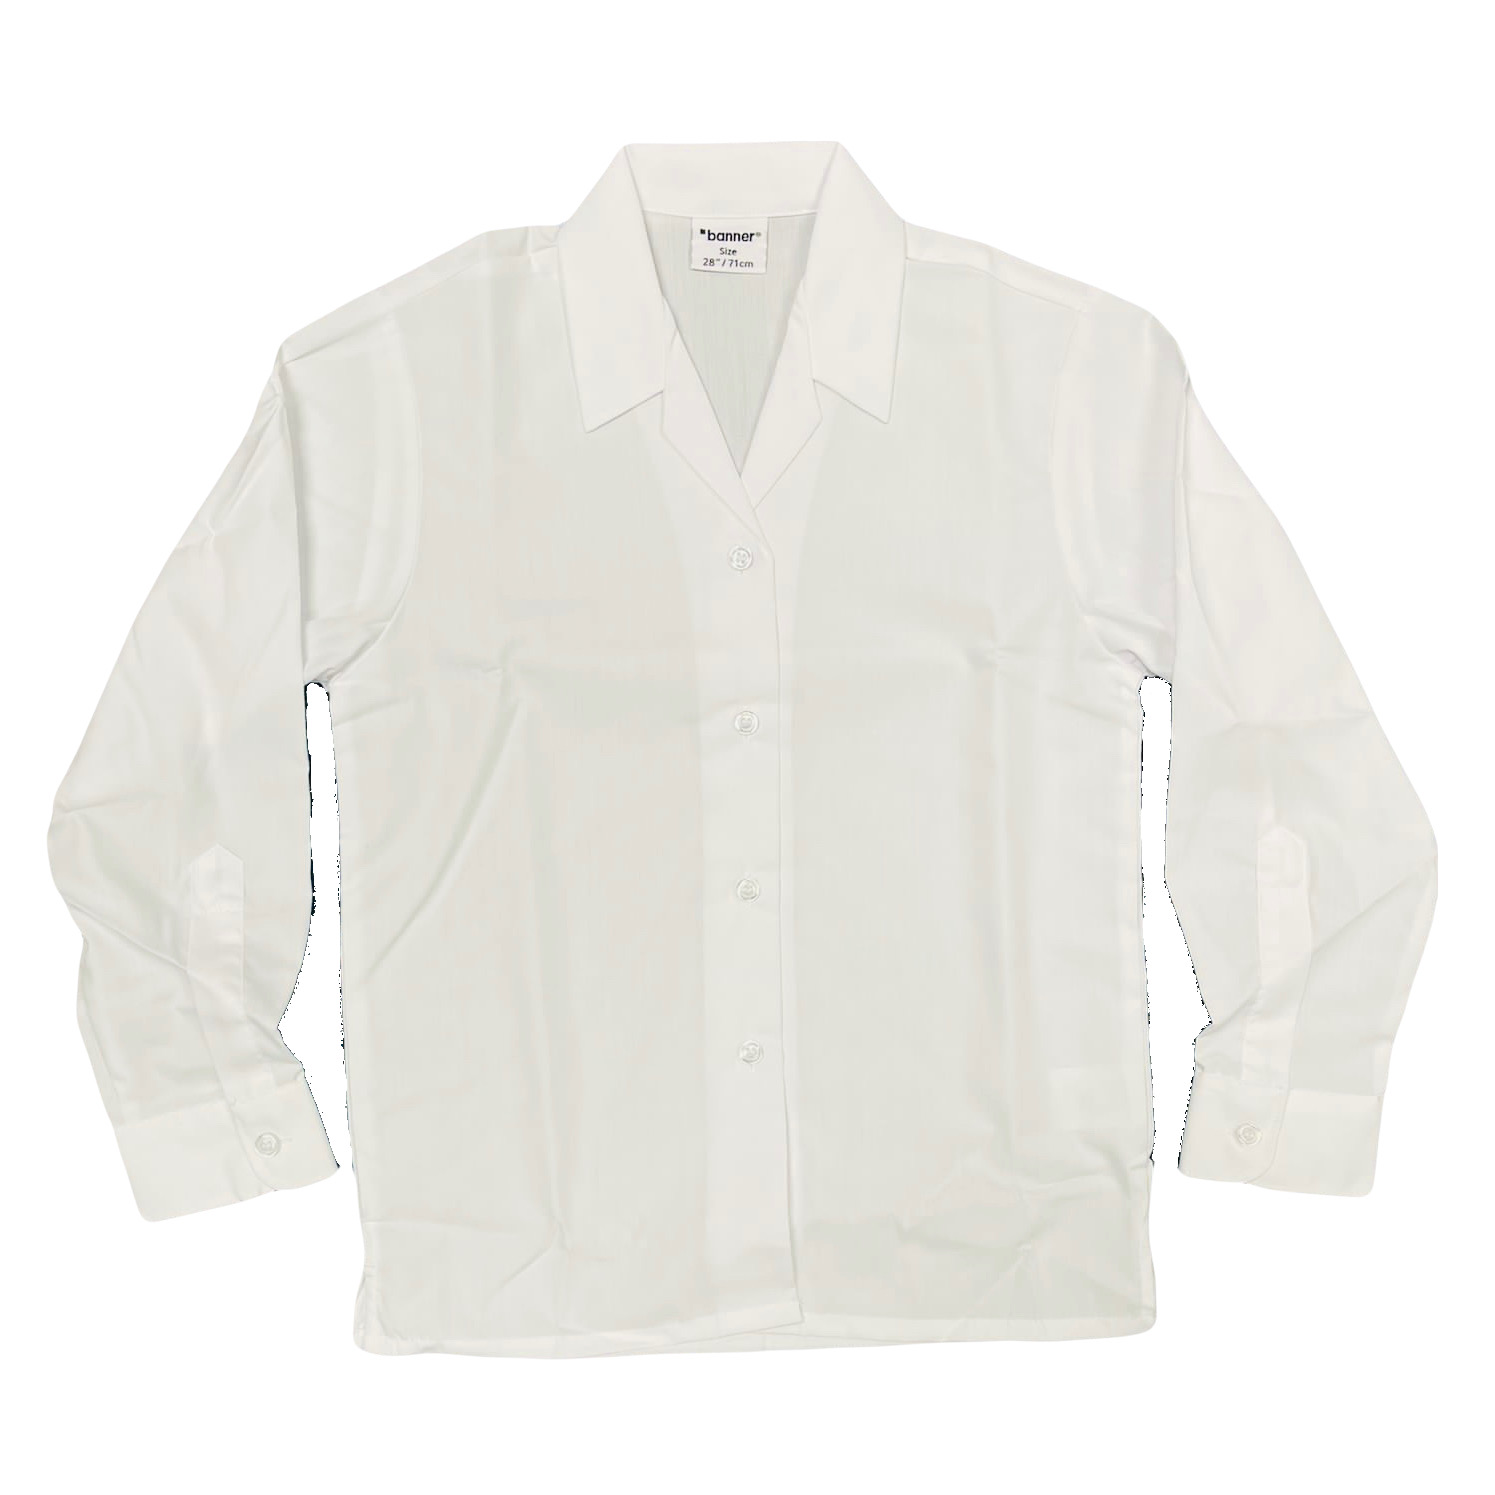 Chatham and Clarendon Revere Blouse long sleeve – 2 pack